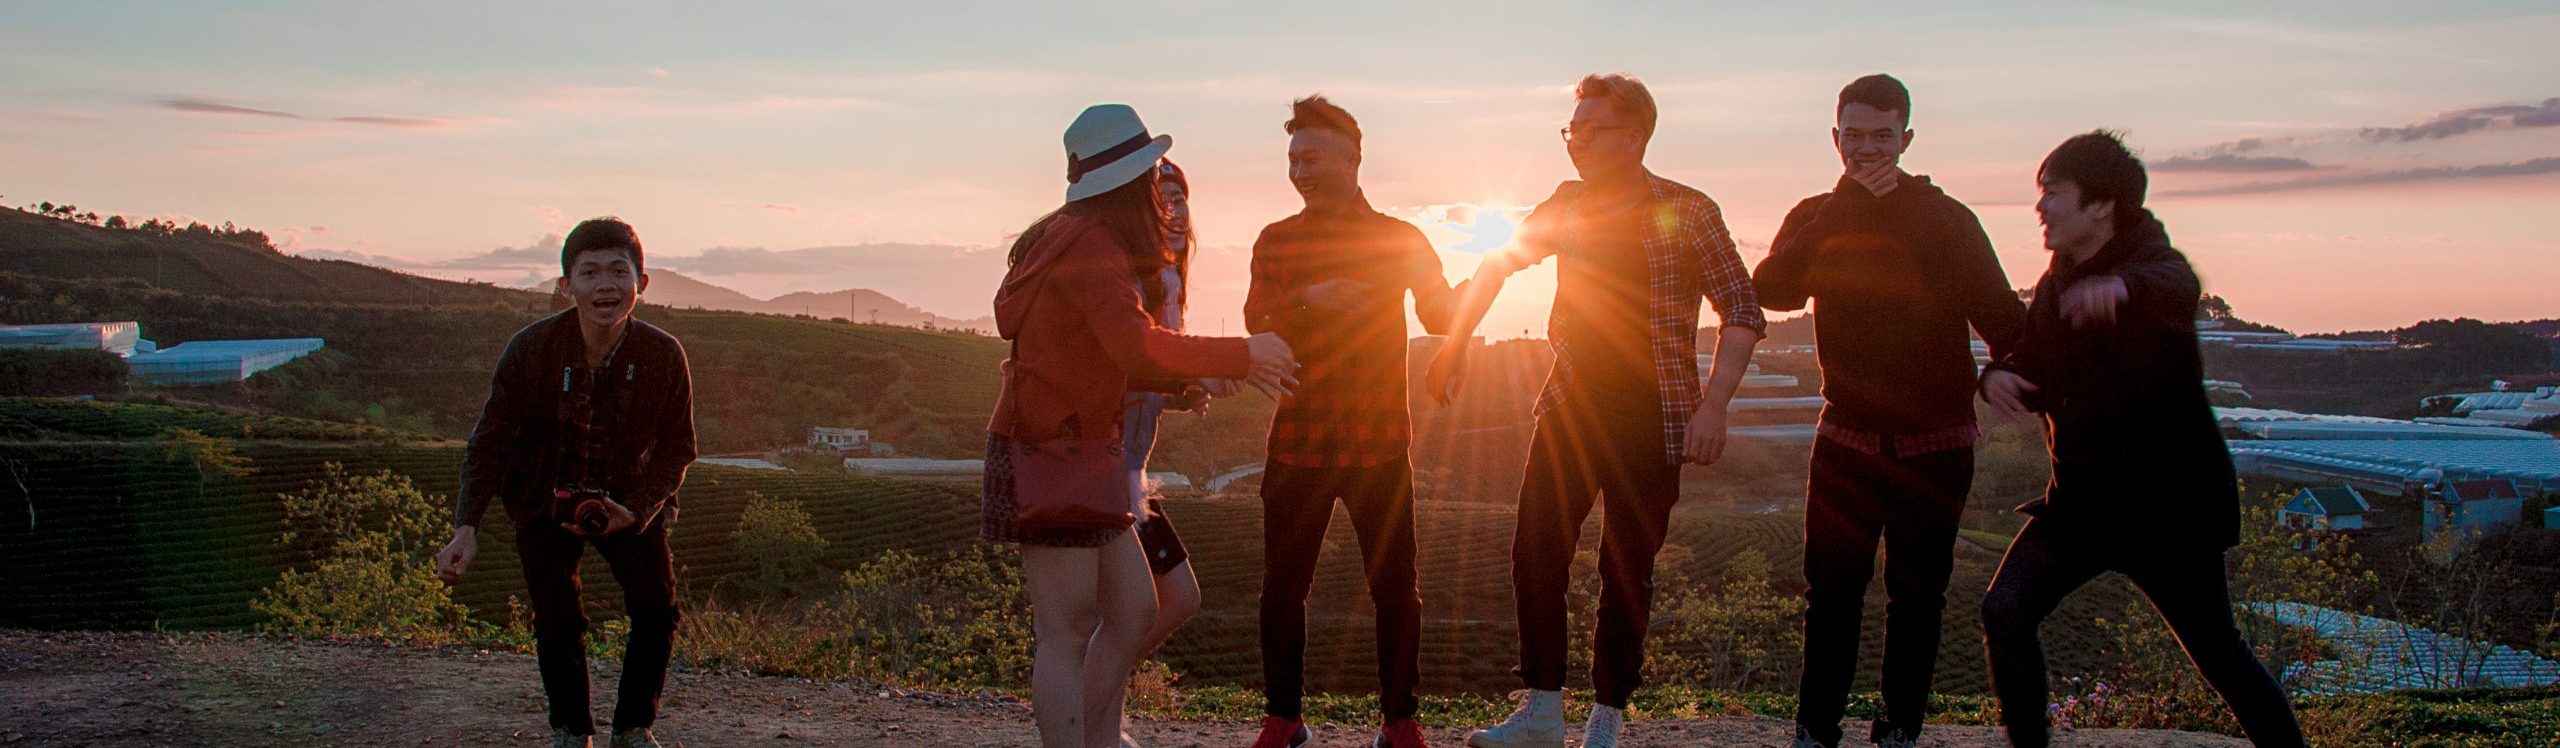 A group of teens laughing at sunset outside in nature.